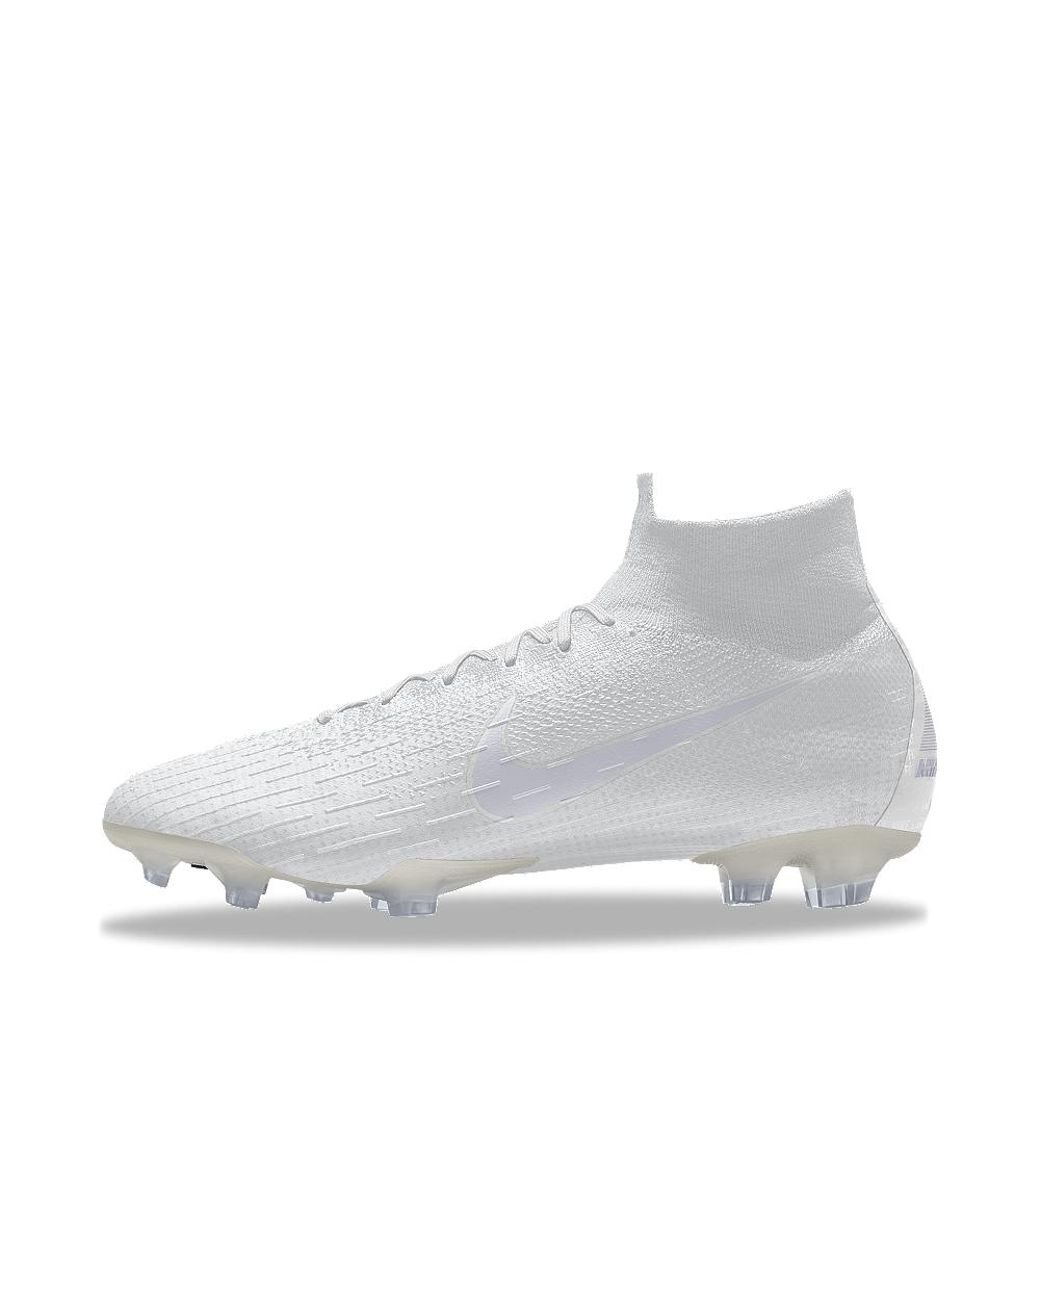 Nike Mercurial Superfly 360 Elite Fg Id Firm-ground Soccer Cleats in Gray